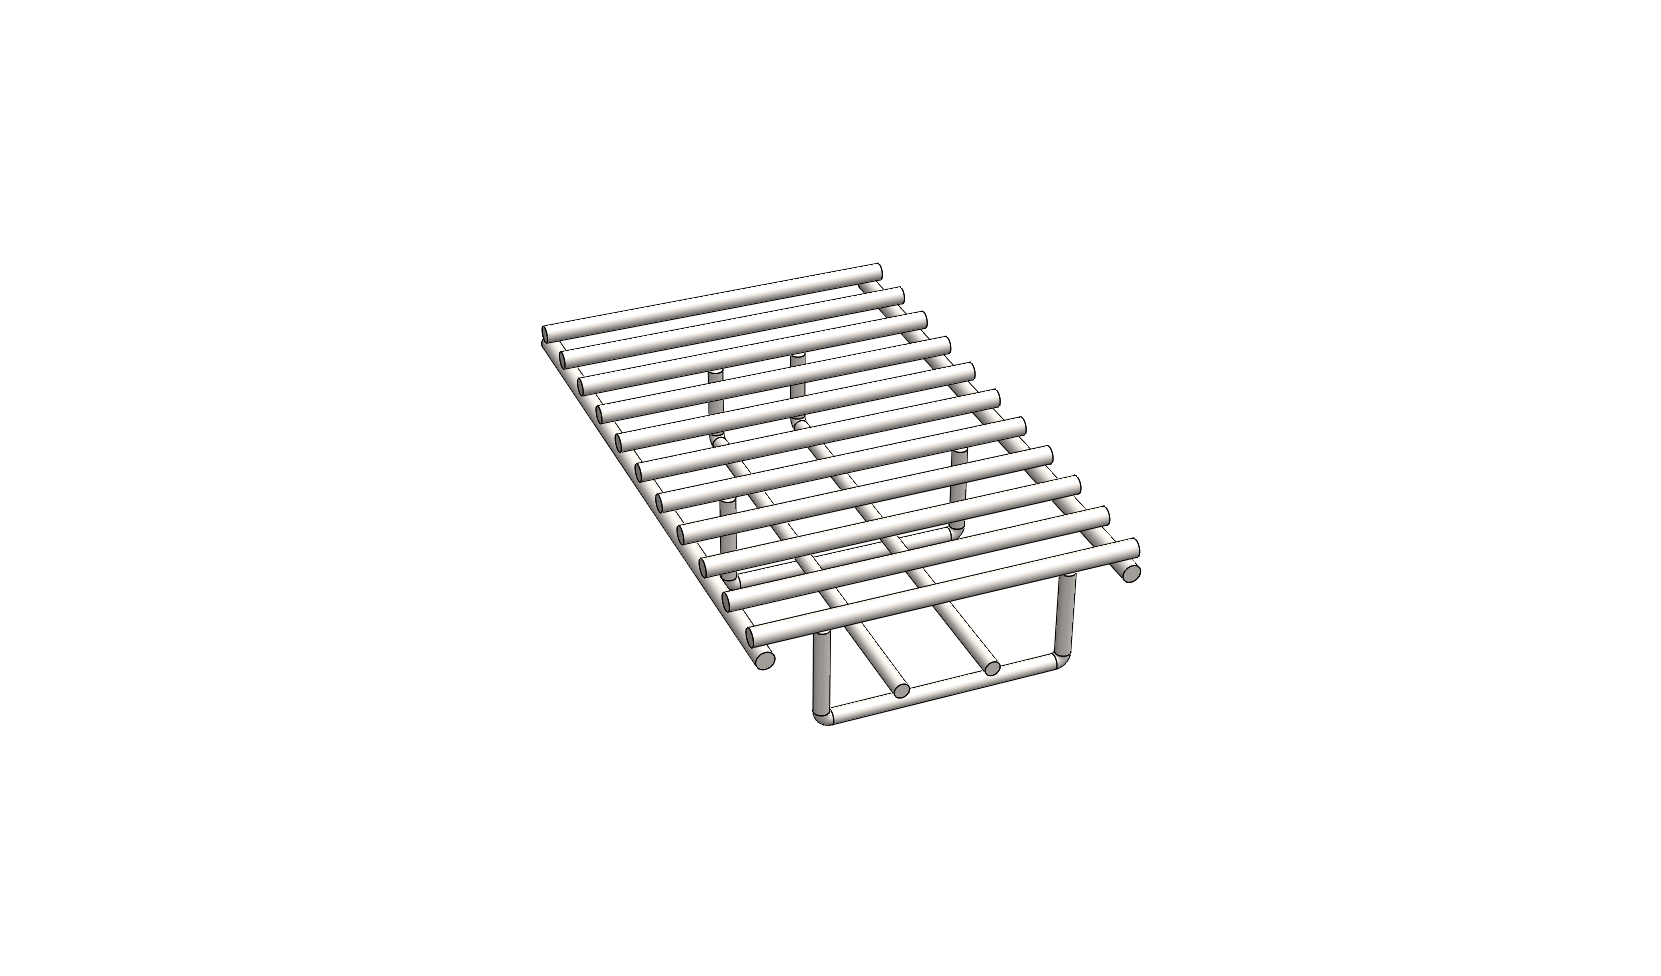 CHARCOAL GRATE